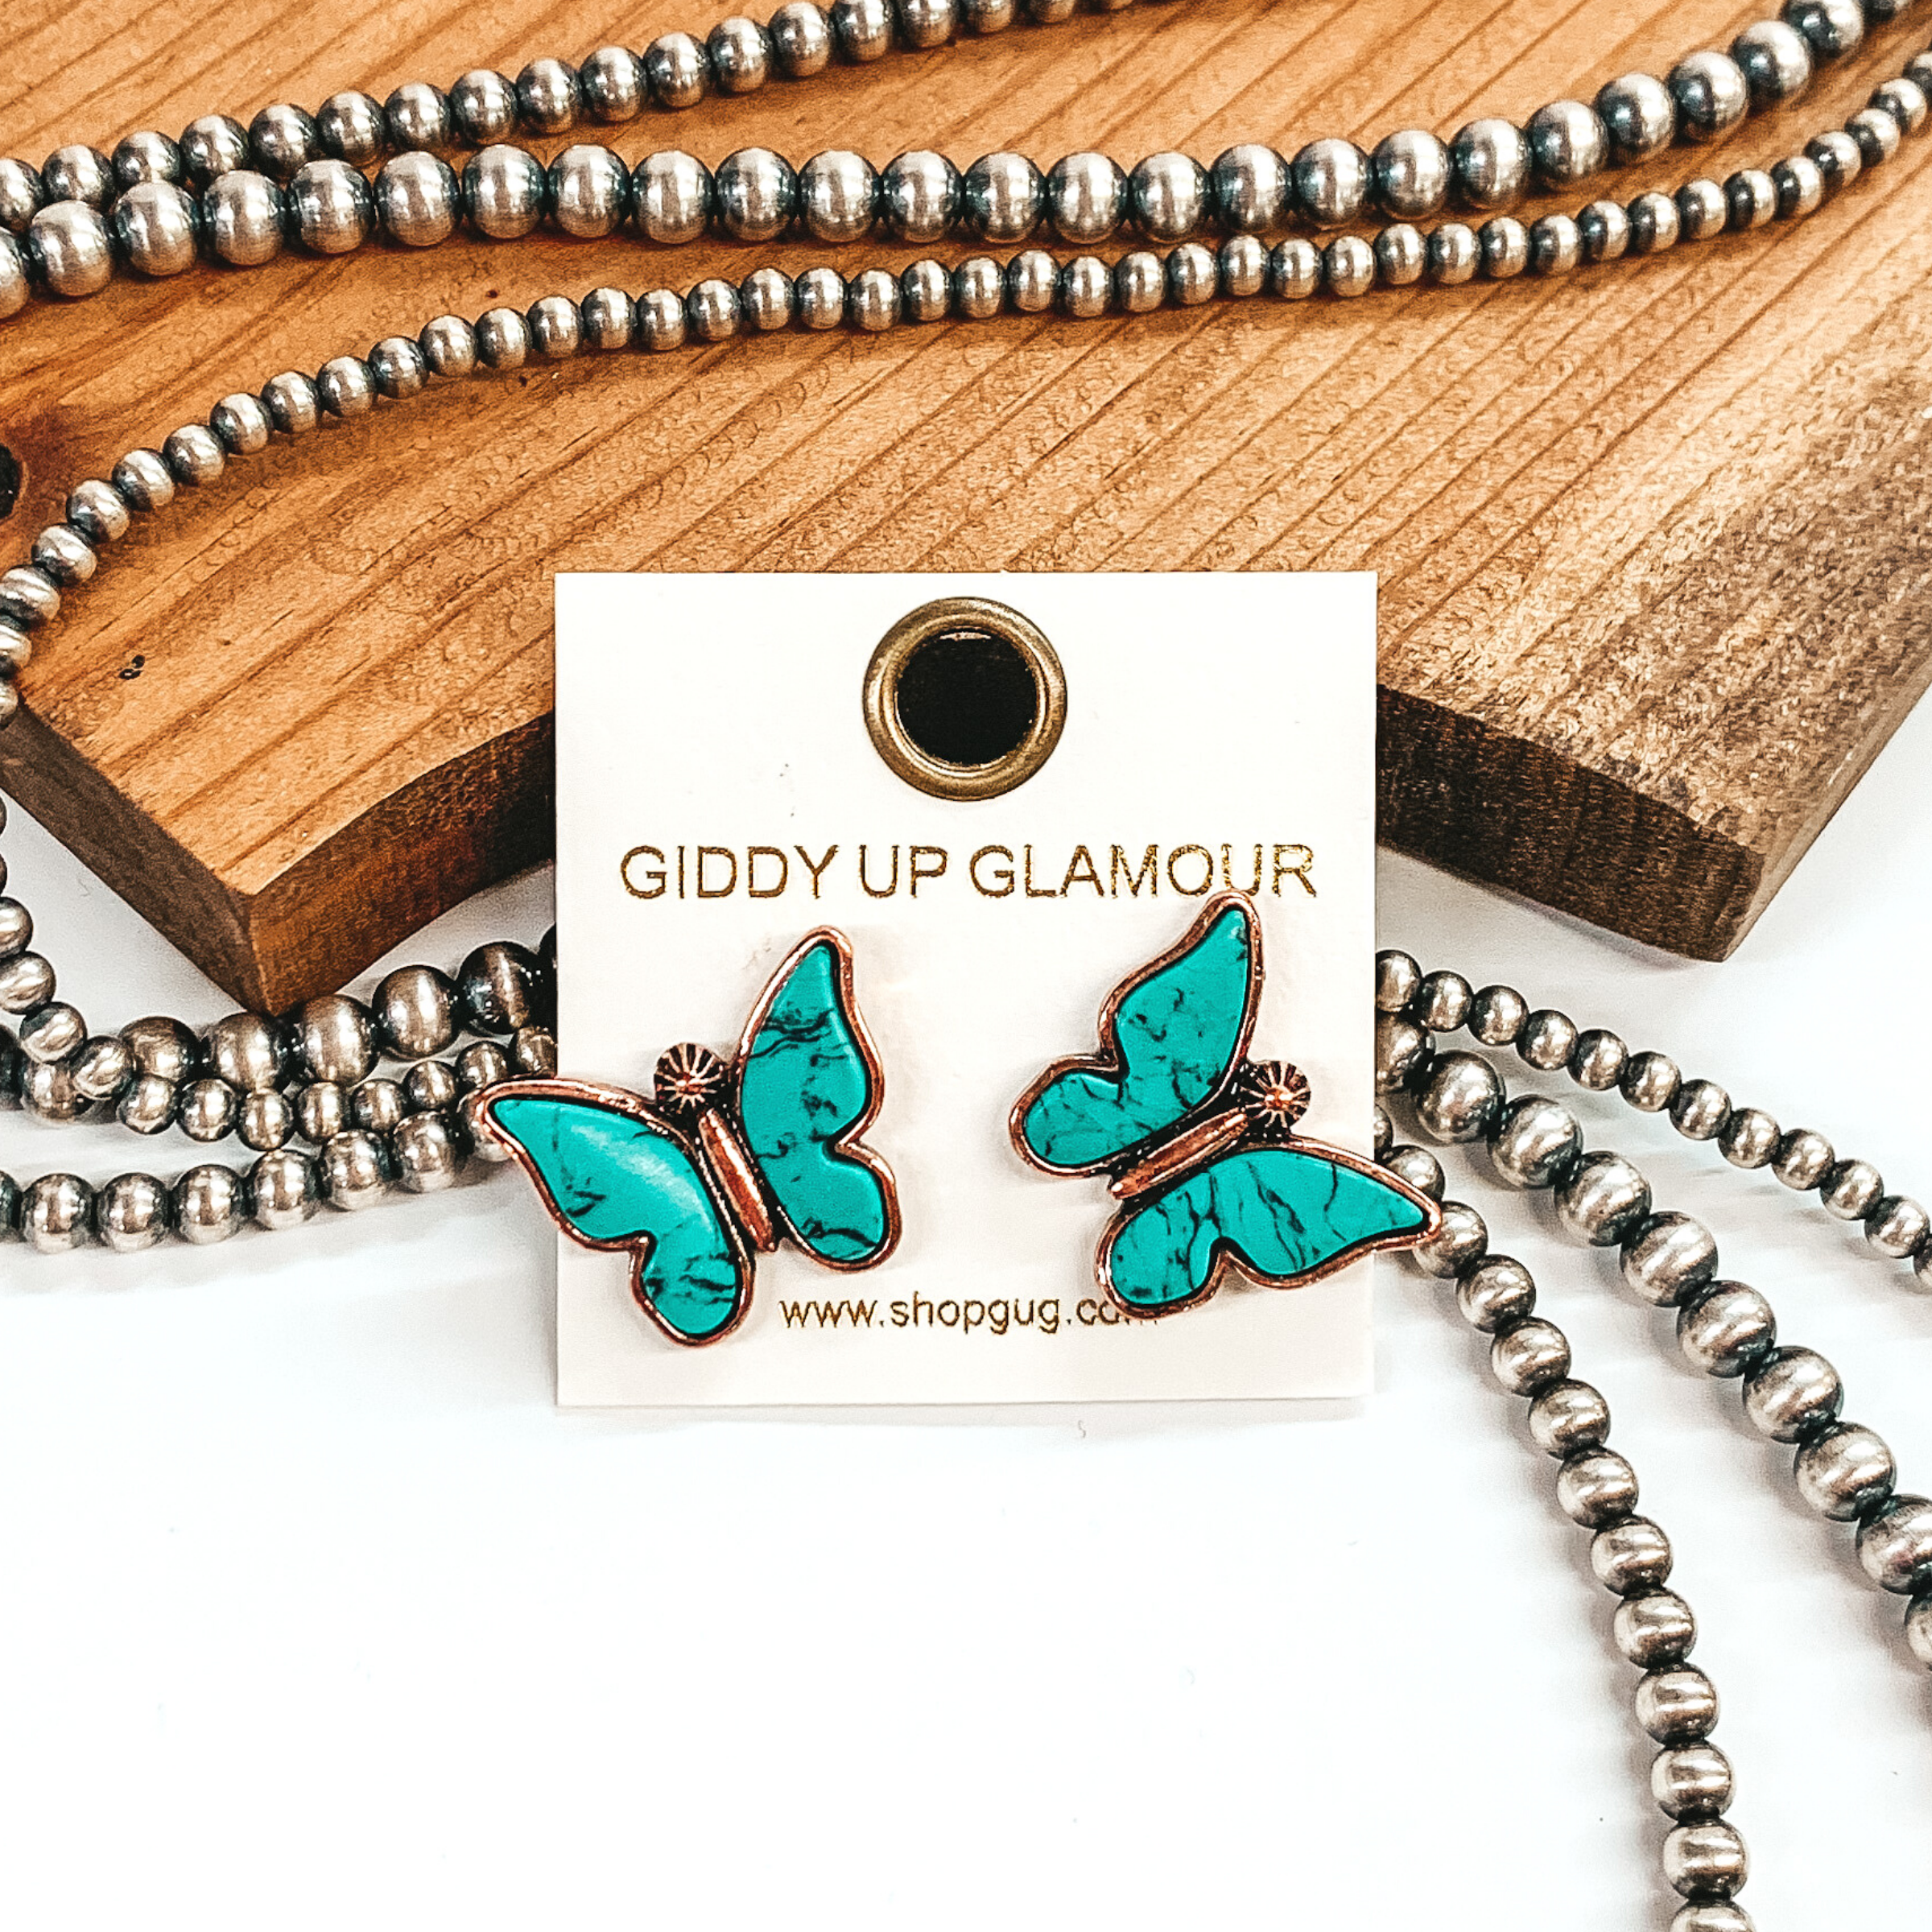 Copper post stud earrings shaped like a butterfly with turquoise stones for wings. These earrings are pictured in front of brown wood with some silver pearls laying behind the earrings.